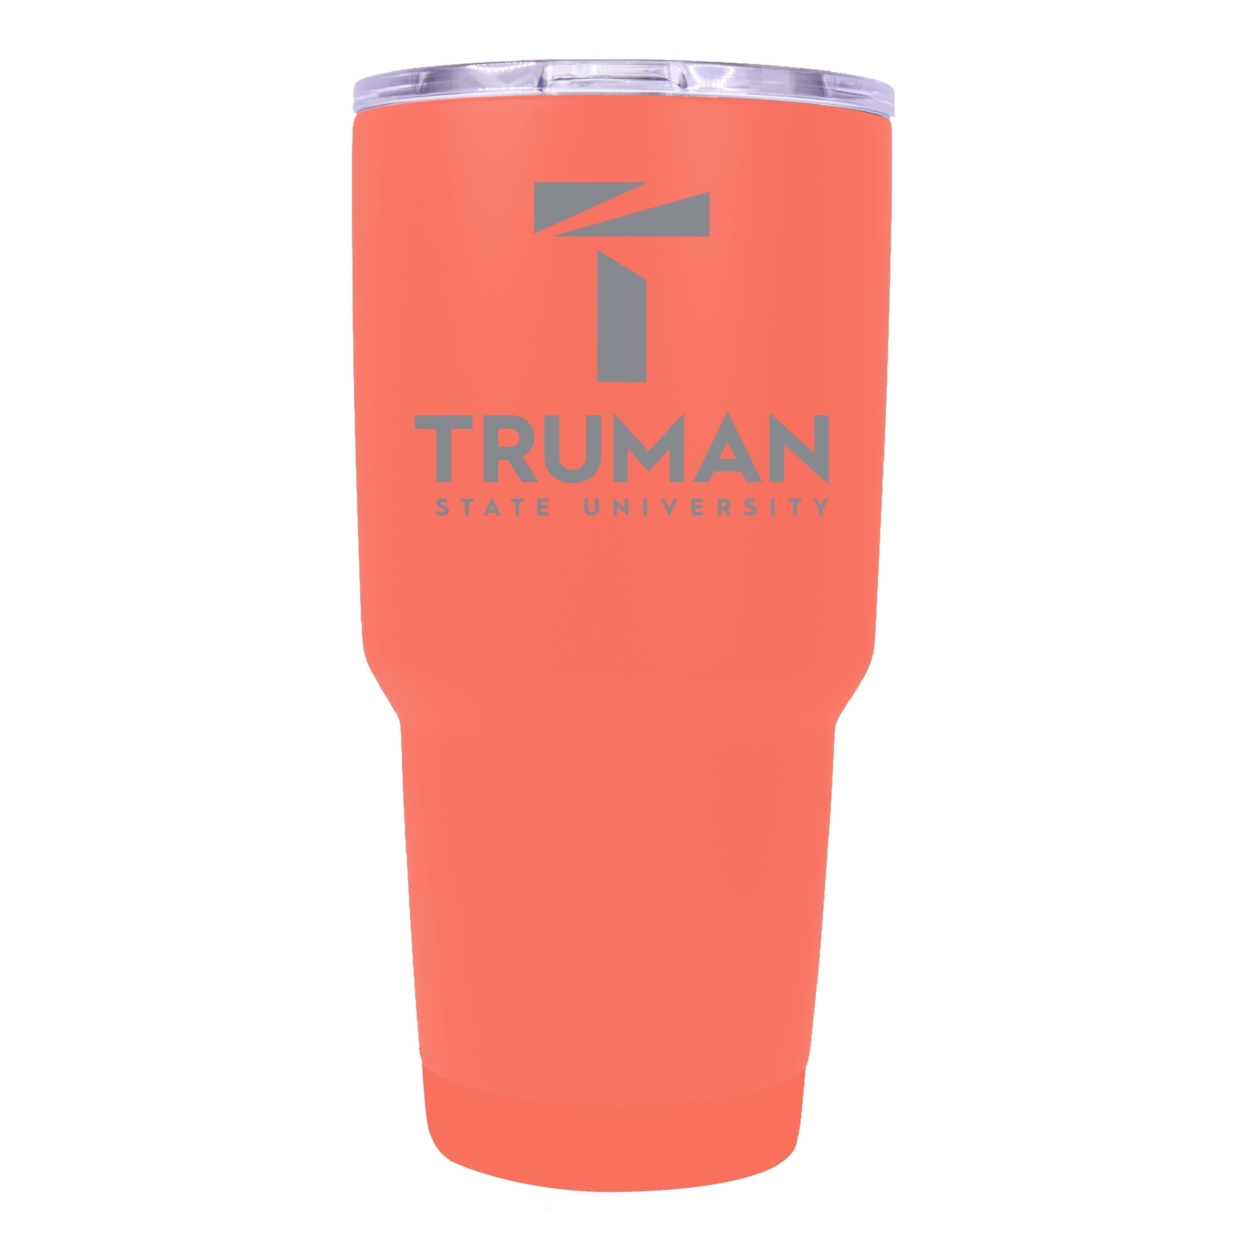 Truman State University 24 Oz Laser Engraved Stainless Steel Insulated Tumbler - Choose Your Color. - Coral